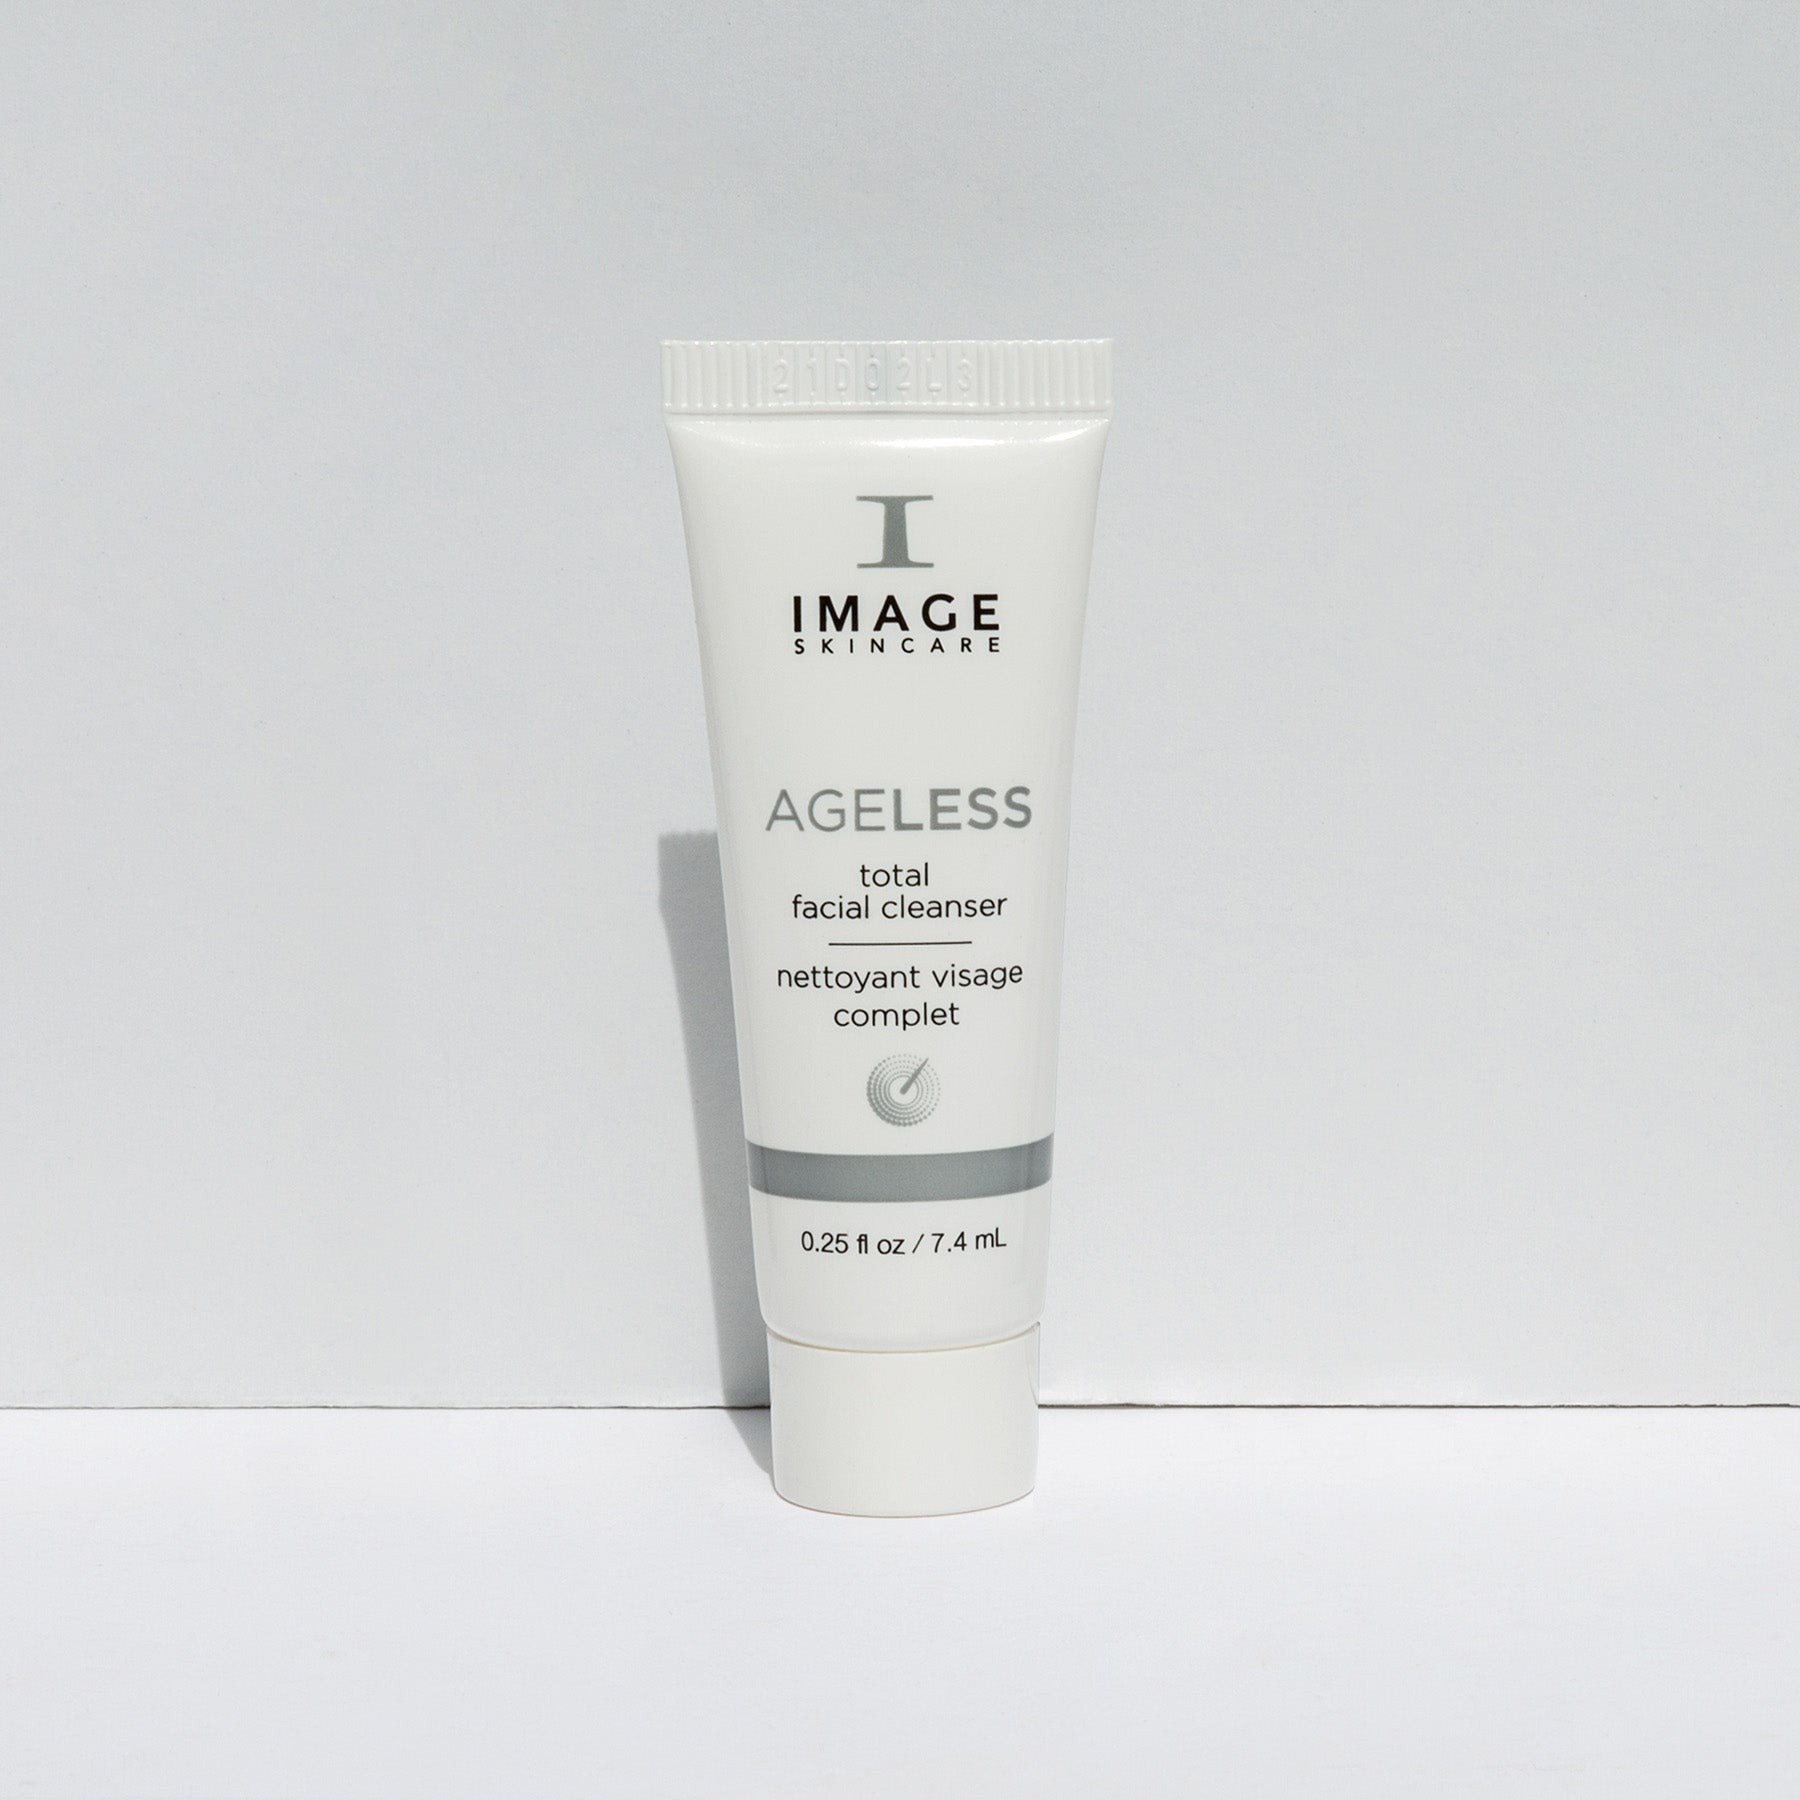 AGELESS Total Facial Cleanser Sample